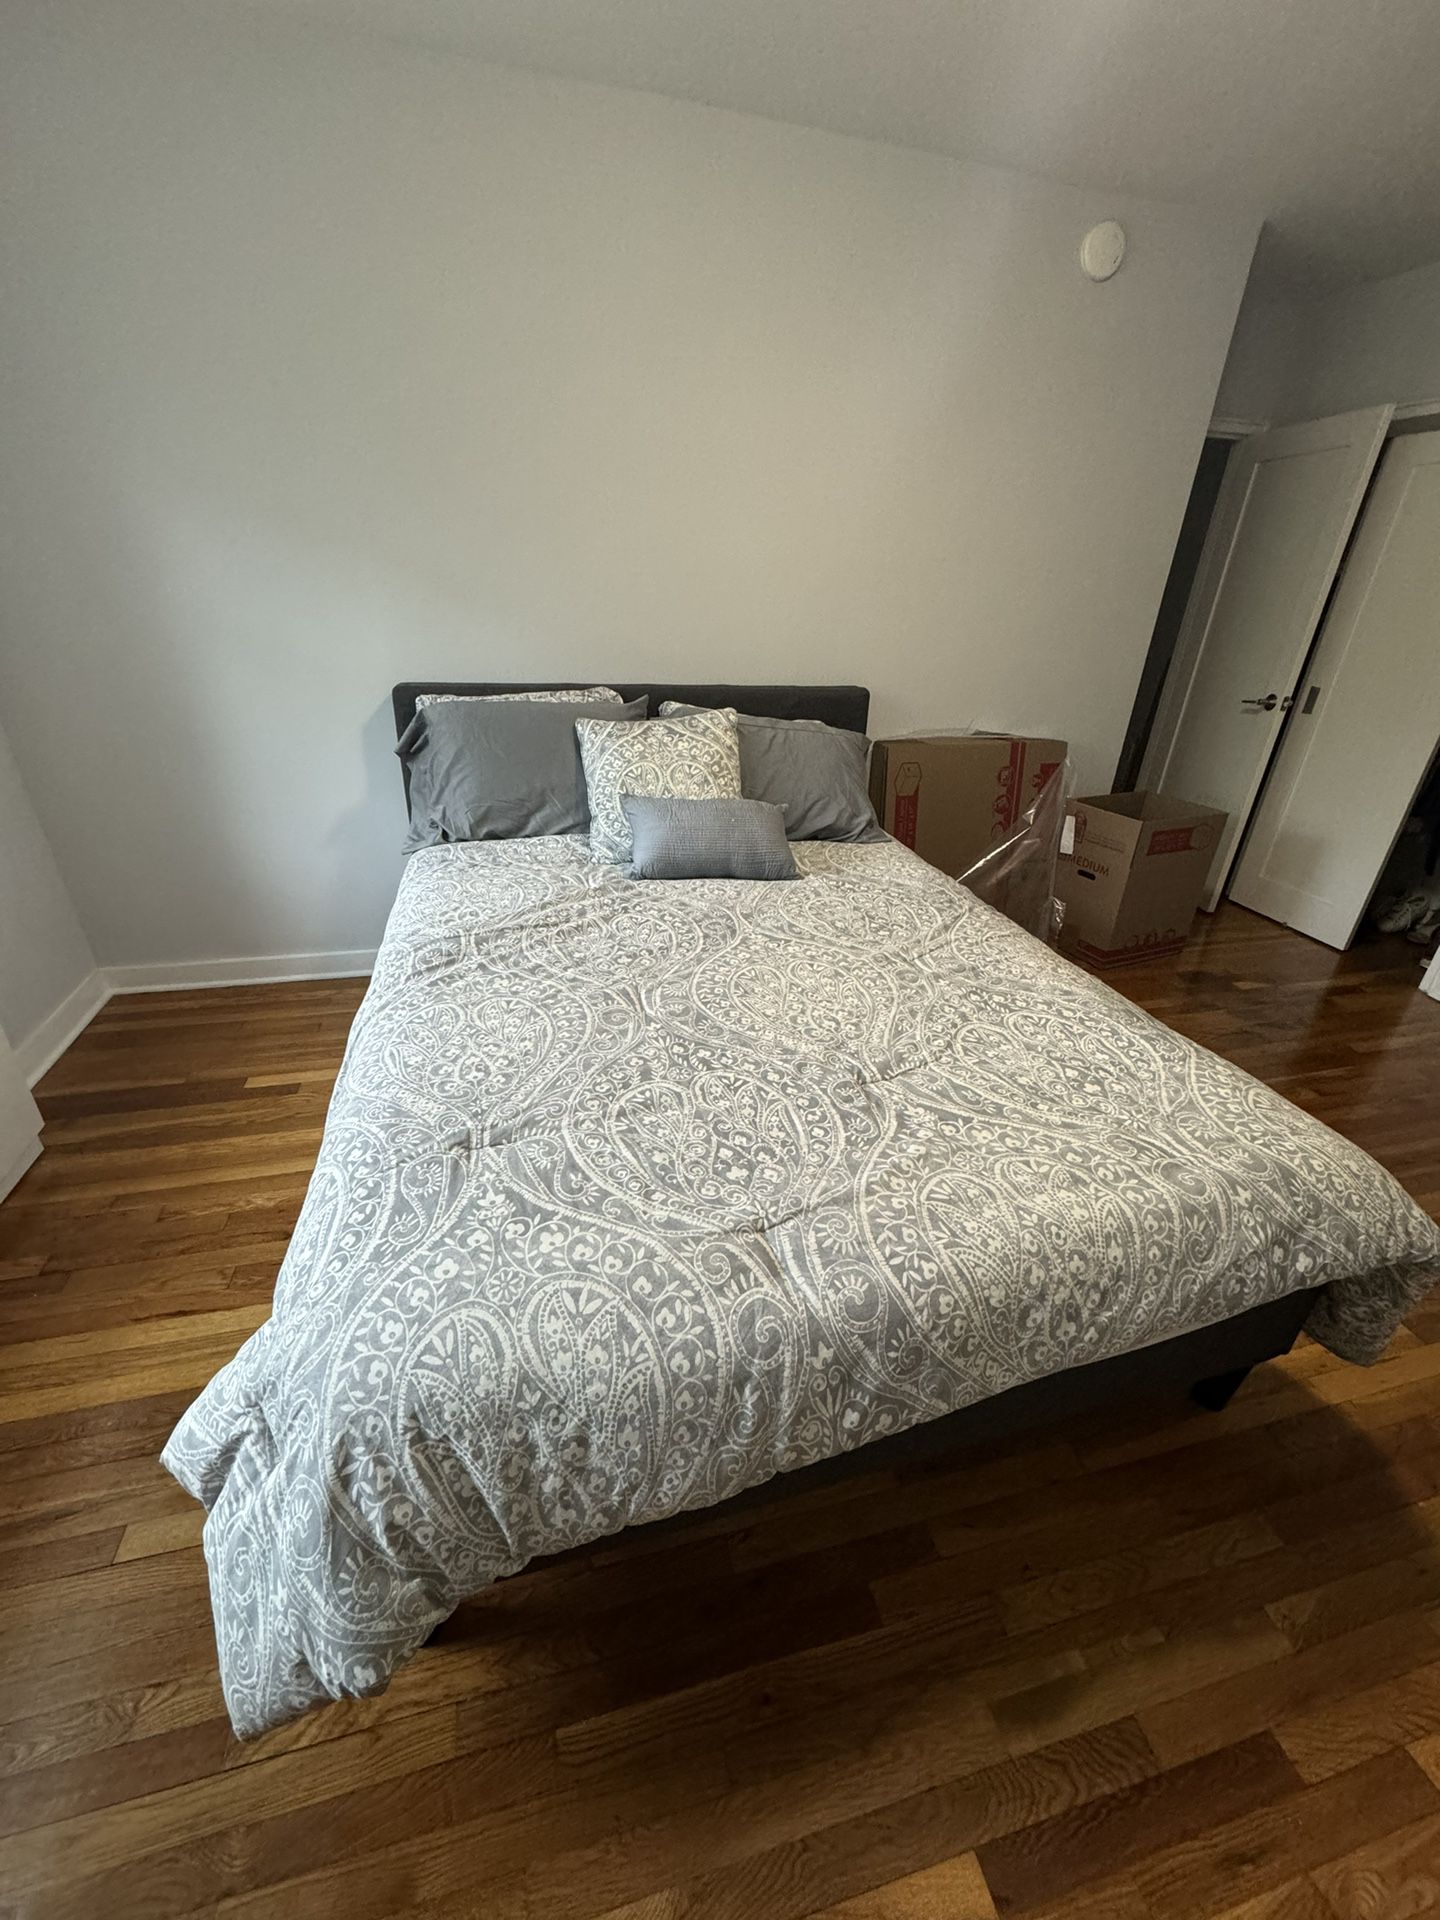 Queen Bed Frame And Mattress- MUST GO